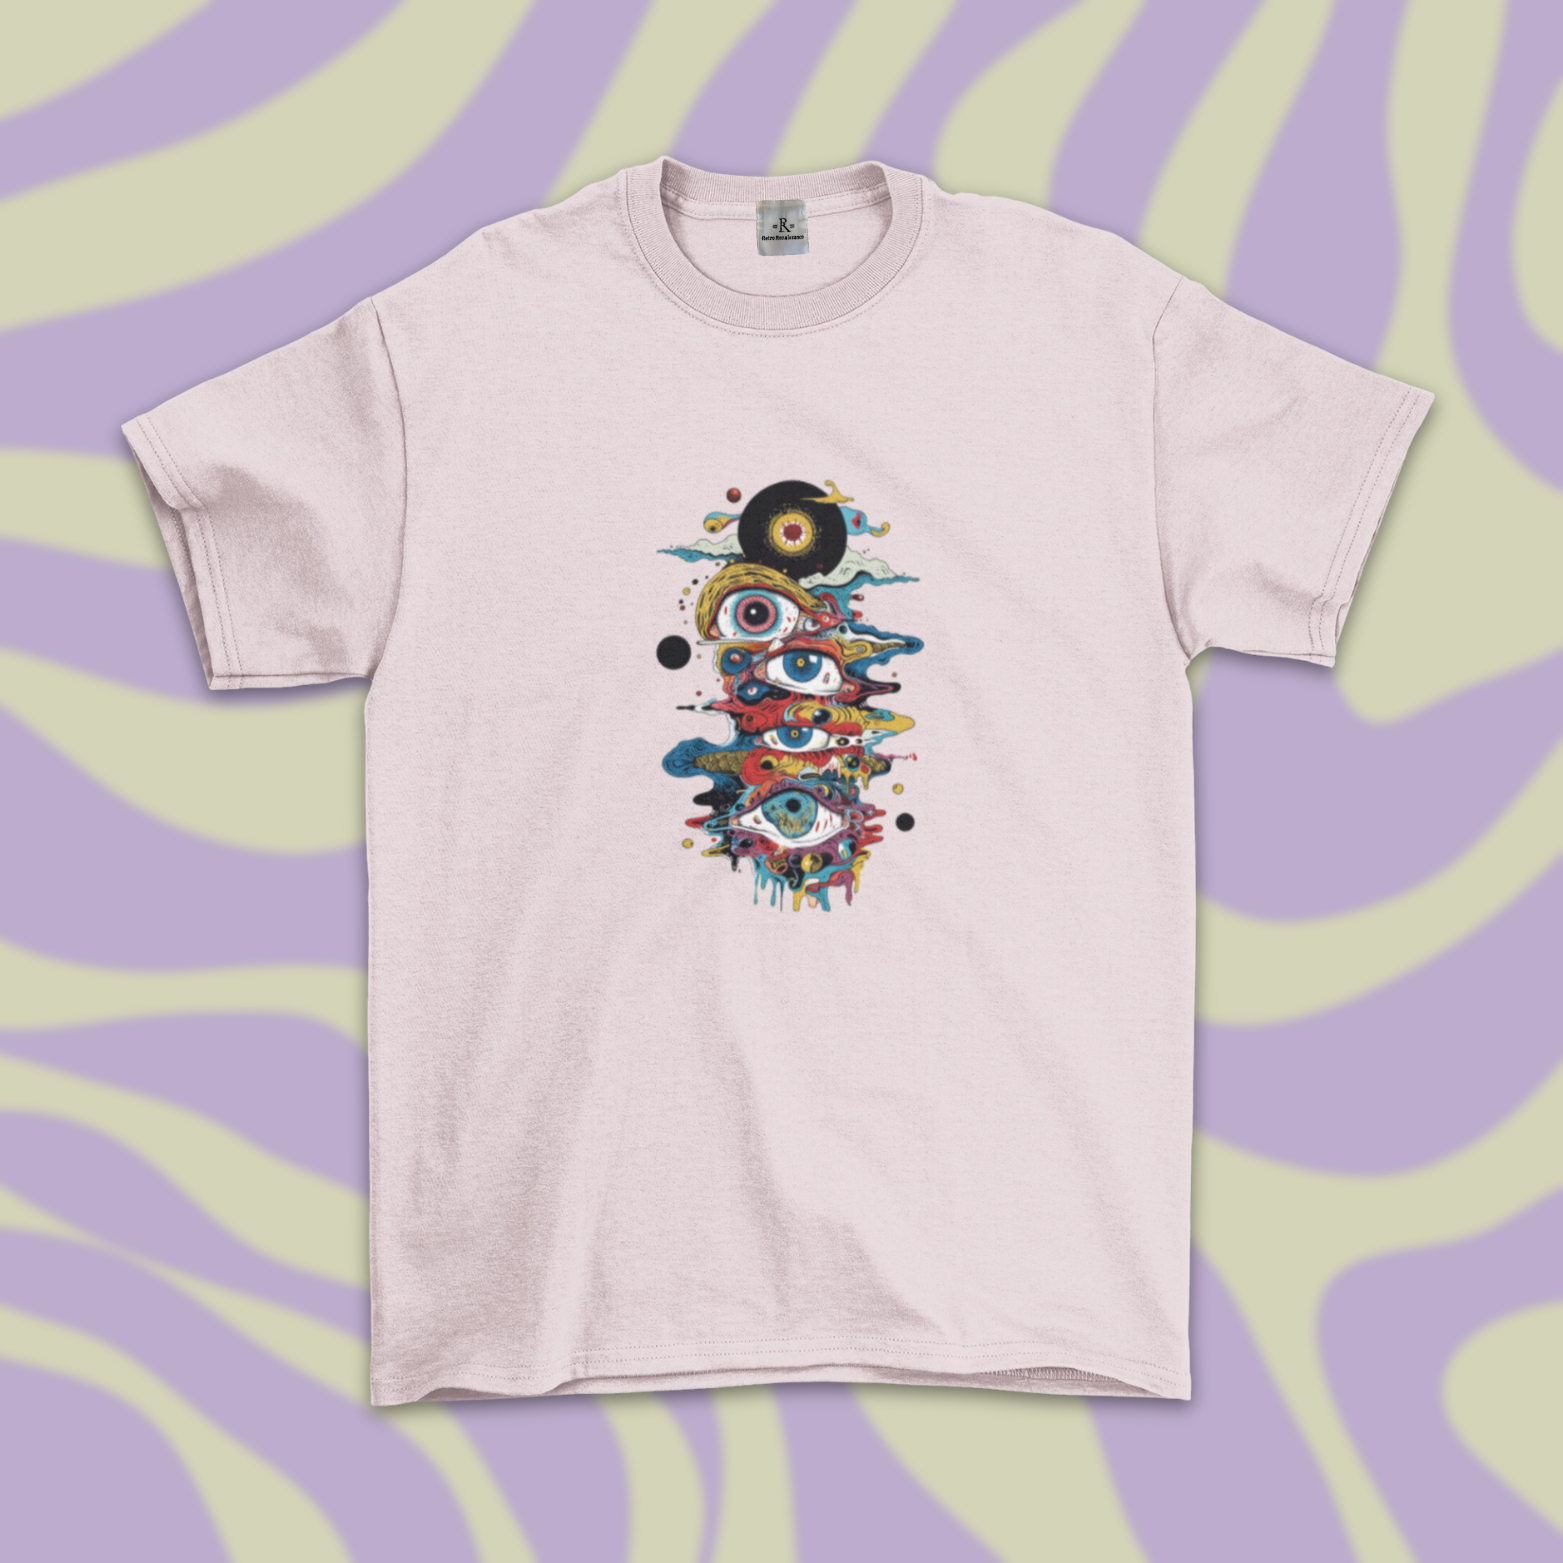 Psychedelic Inspired Tee, a Pile of Eyes